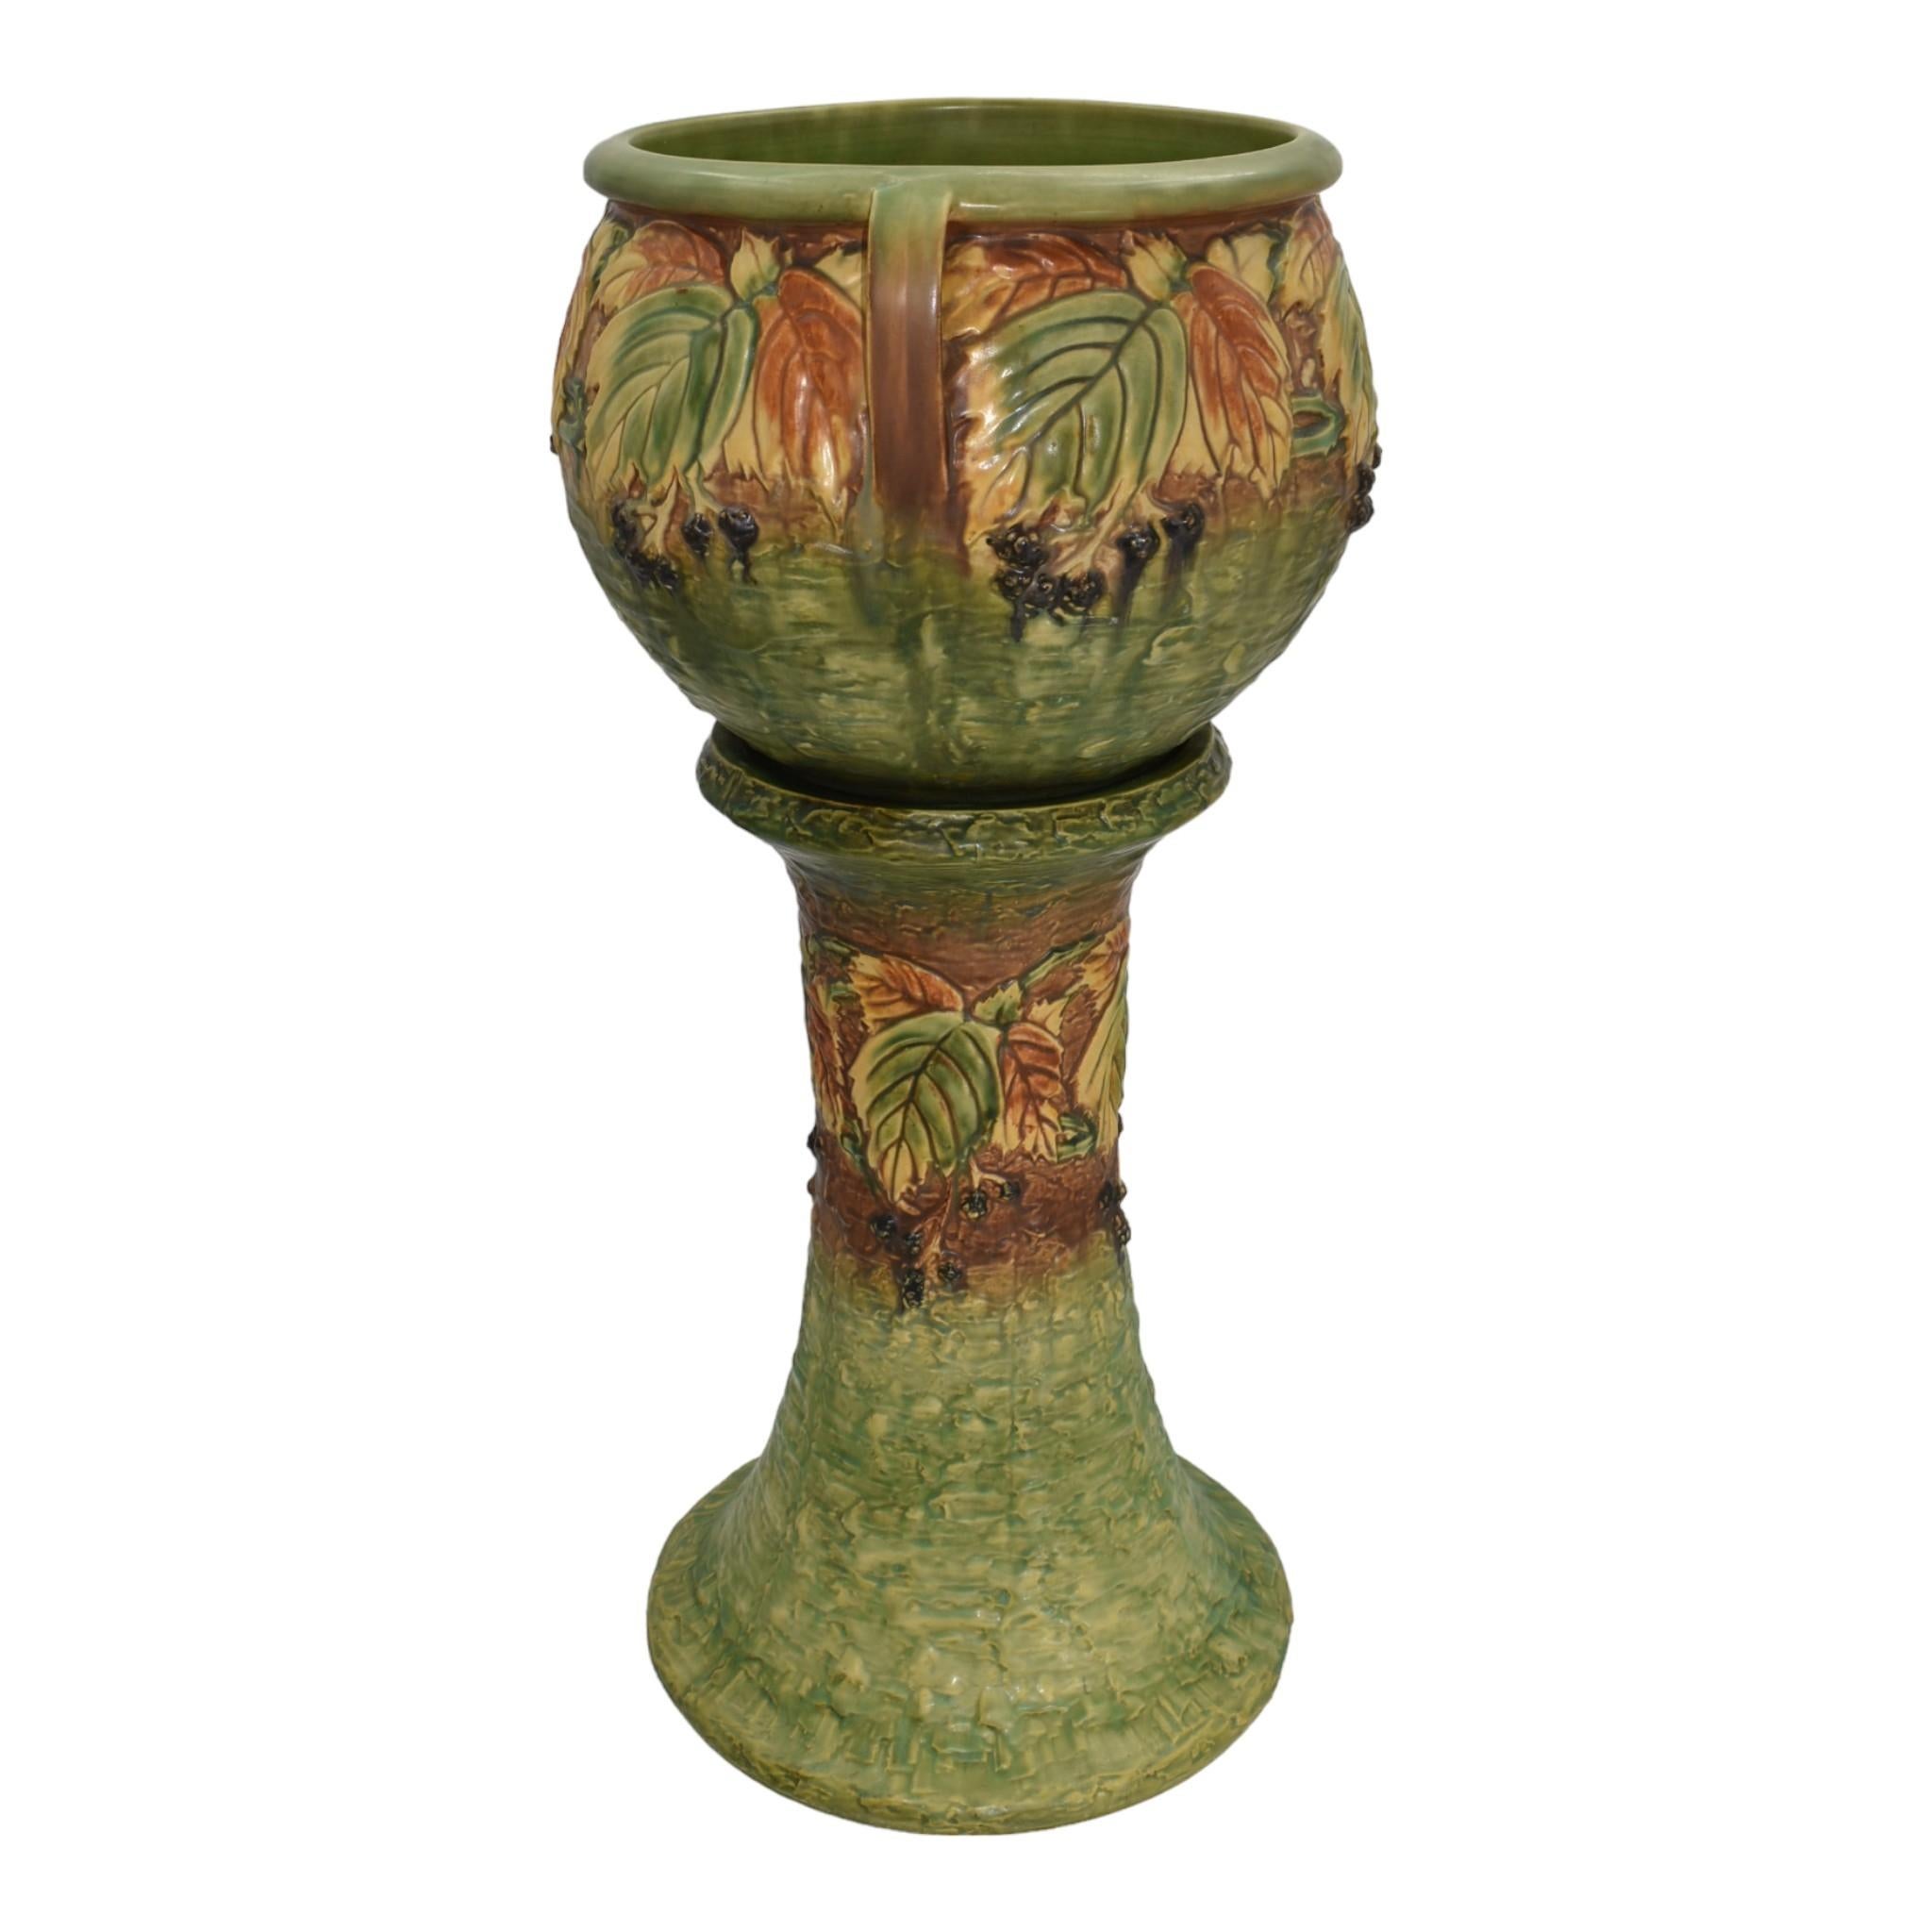 Roseville Blackberry 1932 Vintage Art Pottery Ceramic Jardiniere Pedestal 623-10 In Good Condition For Sale In East Peoria, IL